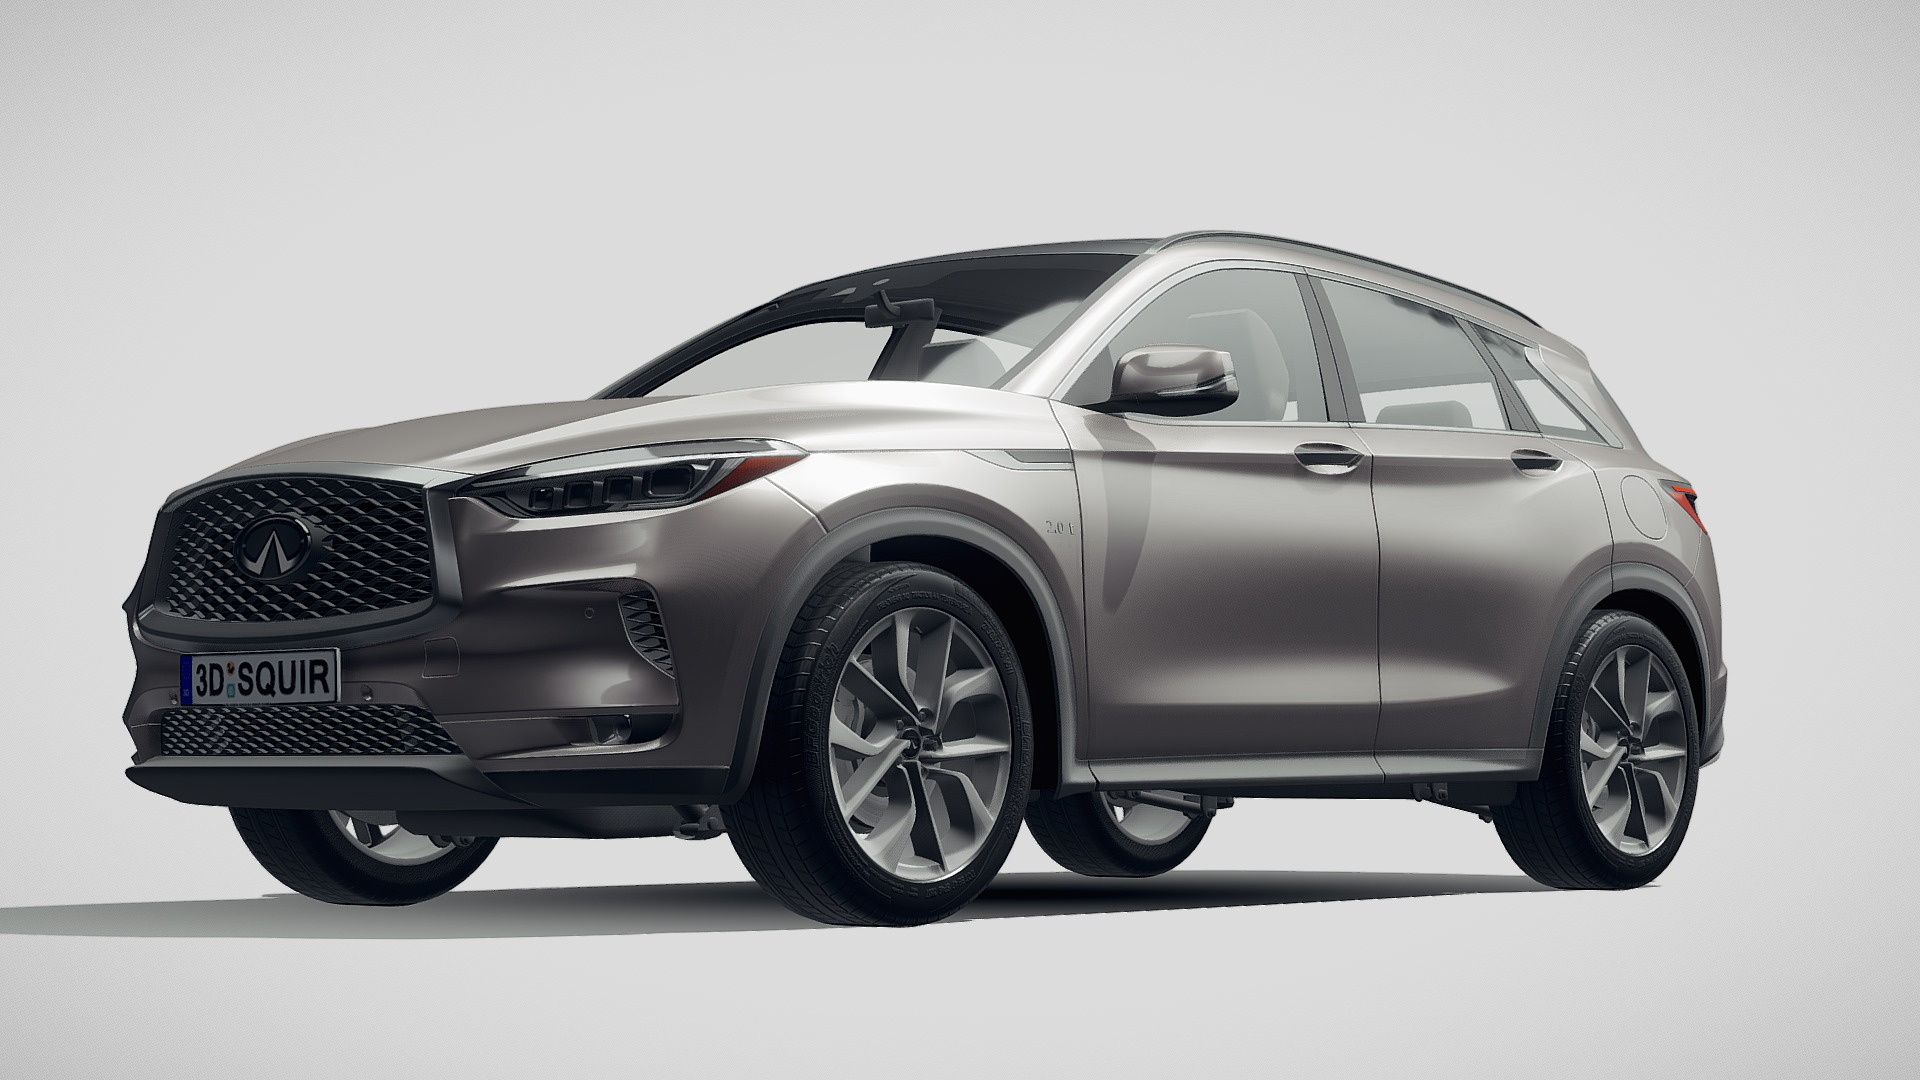 3D model Infiniti QX50 2019 - This is a 3D model of the Infiniti QX50 2019. The 3D model is about a silver car with a black top with Holden Arboretum in the background.